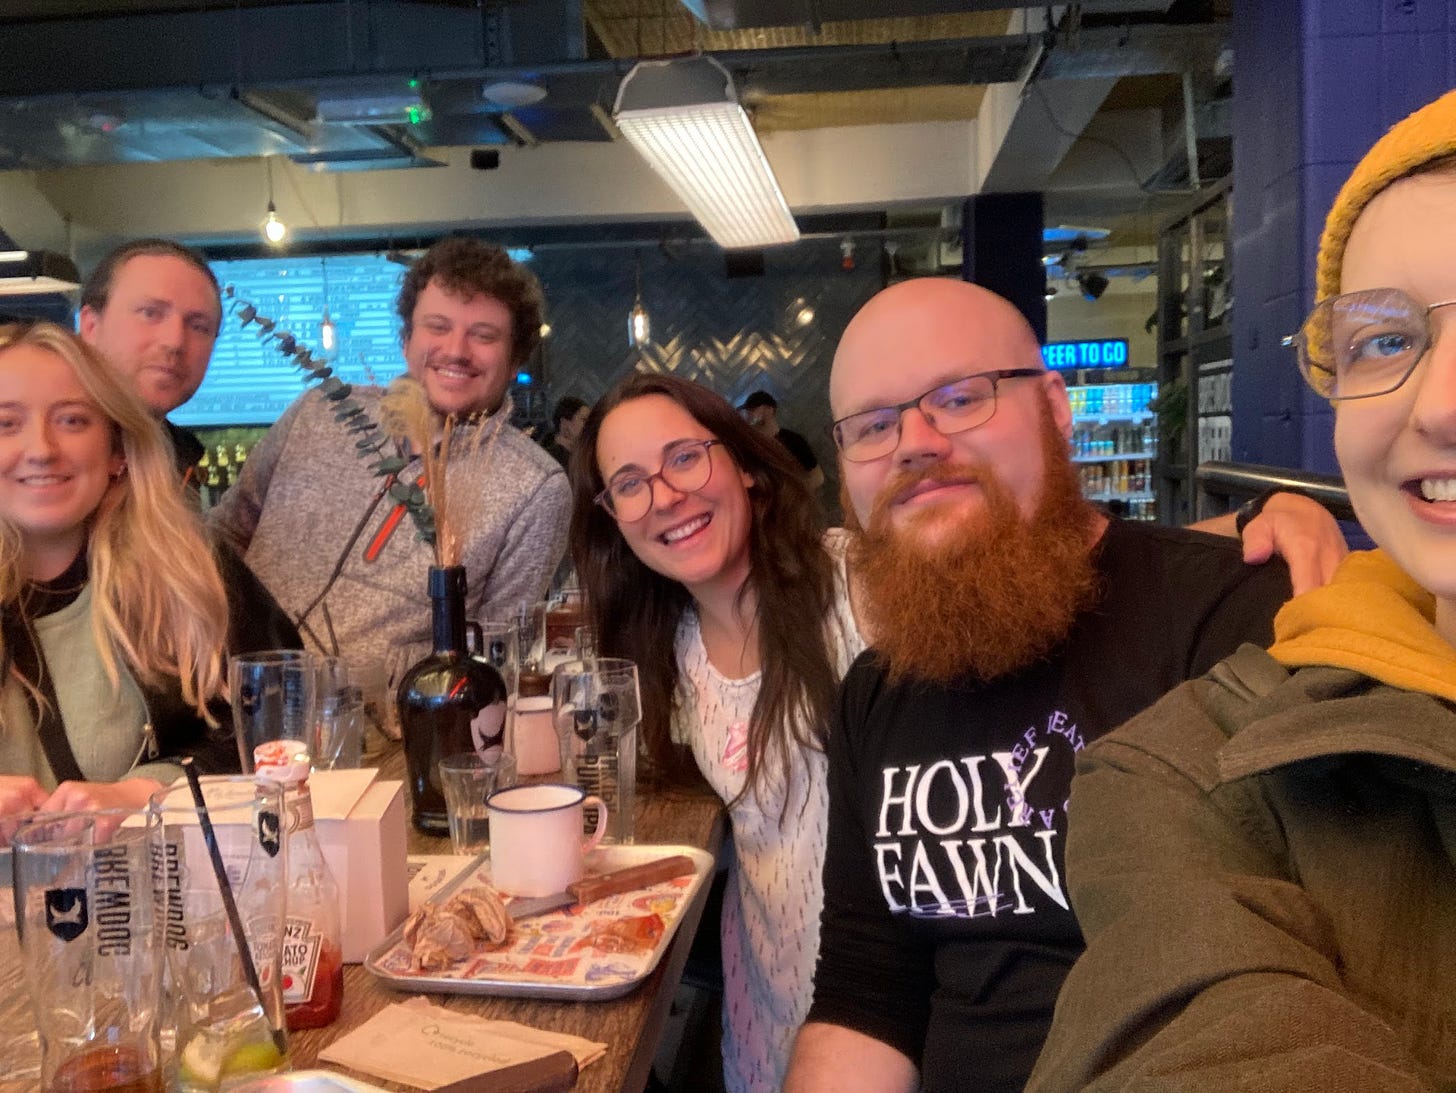 Selfie of 6 people in a bar celebrating Michaela passing her viva. Everyone looks pleased to be there except Marvin who is not quite posed for the photo so looks like he wants to be anywhere else.